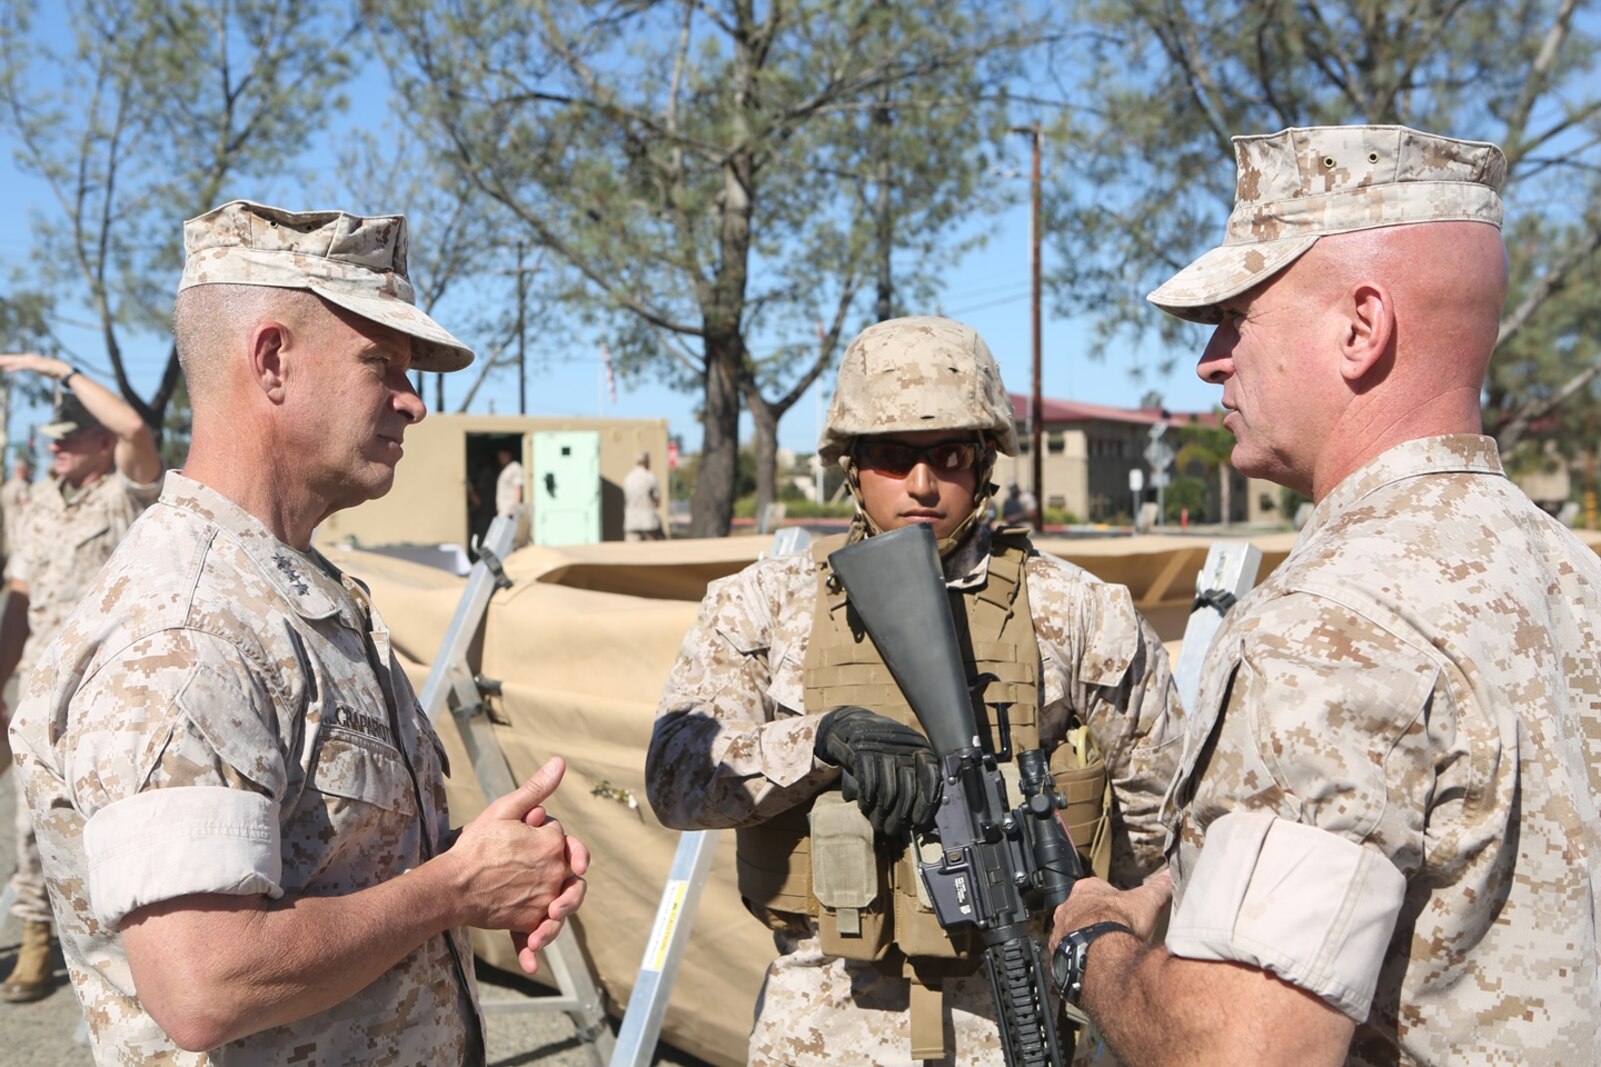 U.S. Marine Corps Sgt. Oscar Tapia demonstrates the capabilities of an amphibious assault fueling station to Lt. Gen. Lewis Craparotta, the commanding general of the I Marine Expeditionary Force, and Brig. Gen. David Ottignon, the commanding general of 1st Marine Logistics Group, aboard Camp Pendleton, Calif., Oct. 19, 2016. Craparotta visited the 1st MLG to see the most up-to-date capabilities the logistics command has to offer I MEF. Tapia is a combat engineer with 7th Engineer Support Battalion, 1st Marine Logistics Group. (U.S. Marine Corps photo by Lance Cpl. Joseph Sorci)